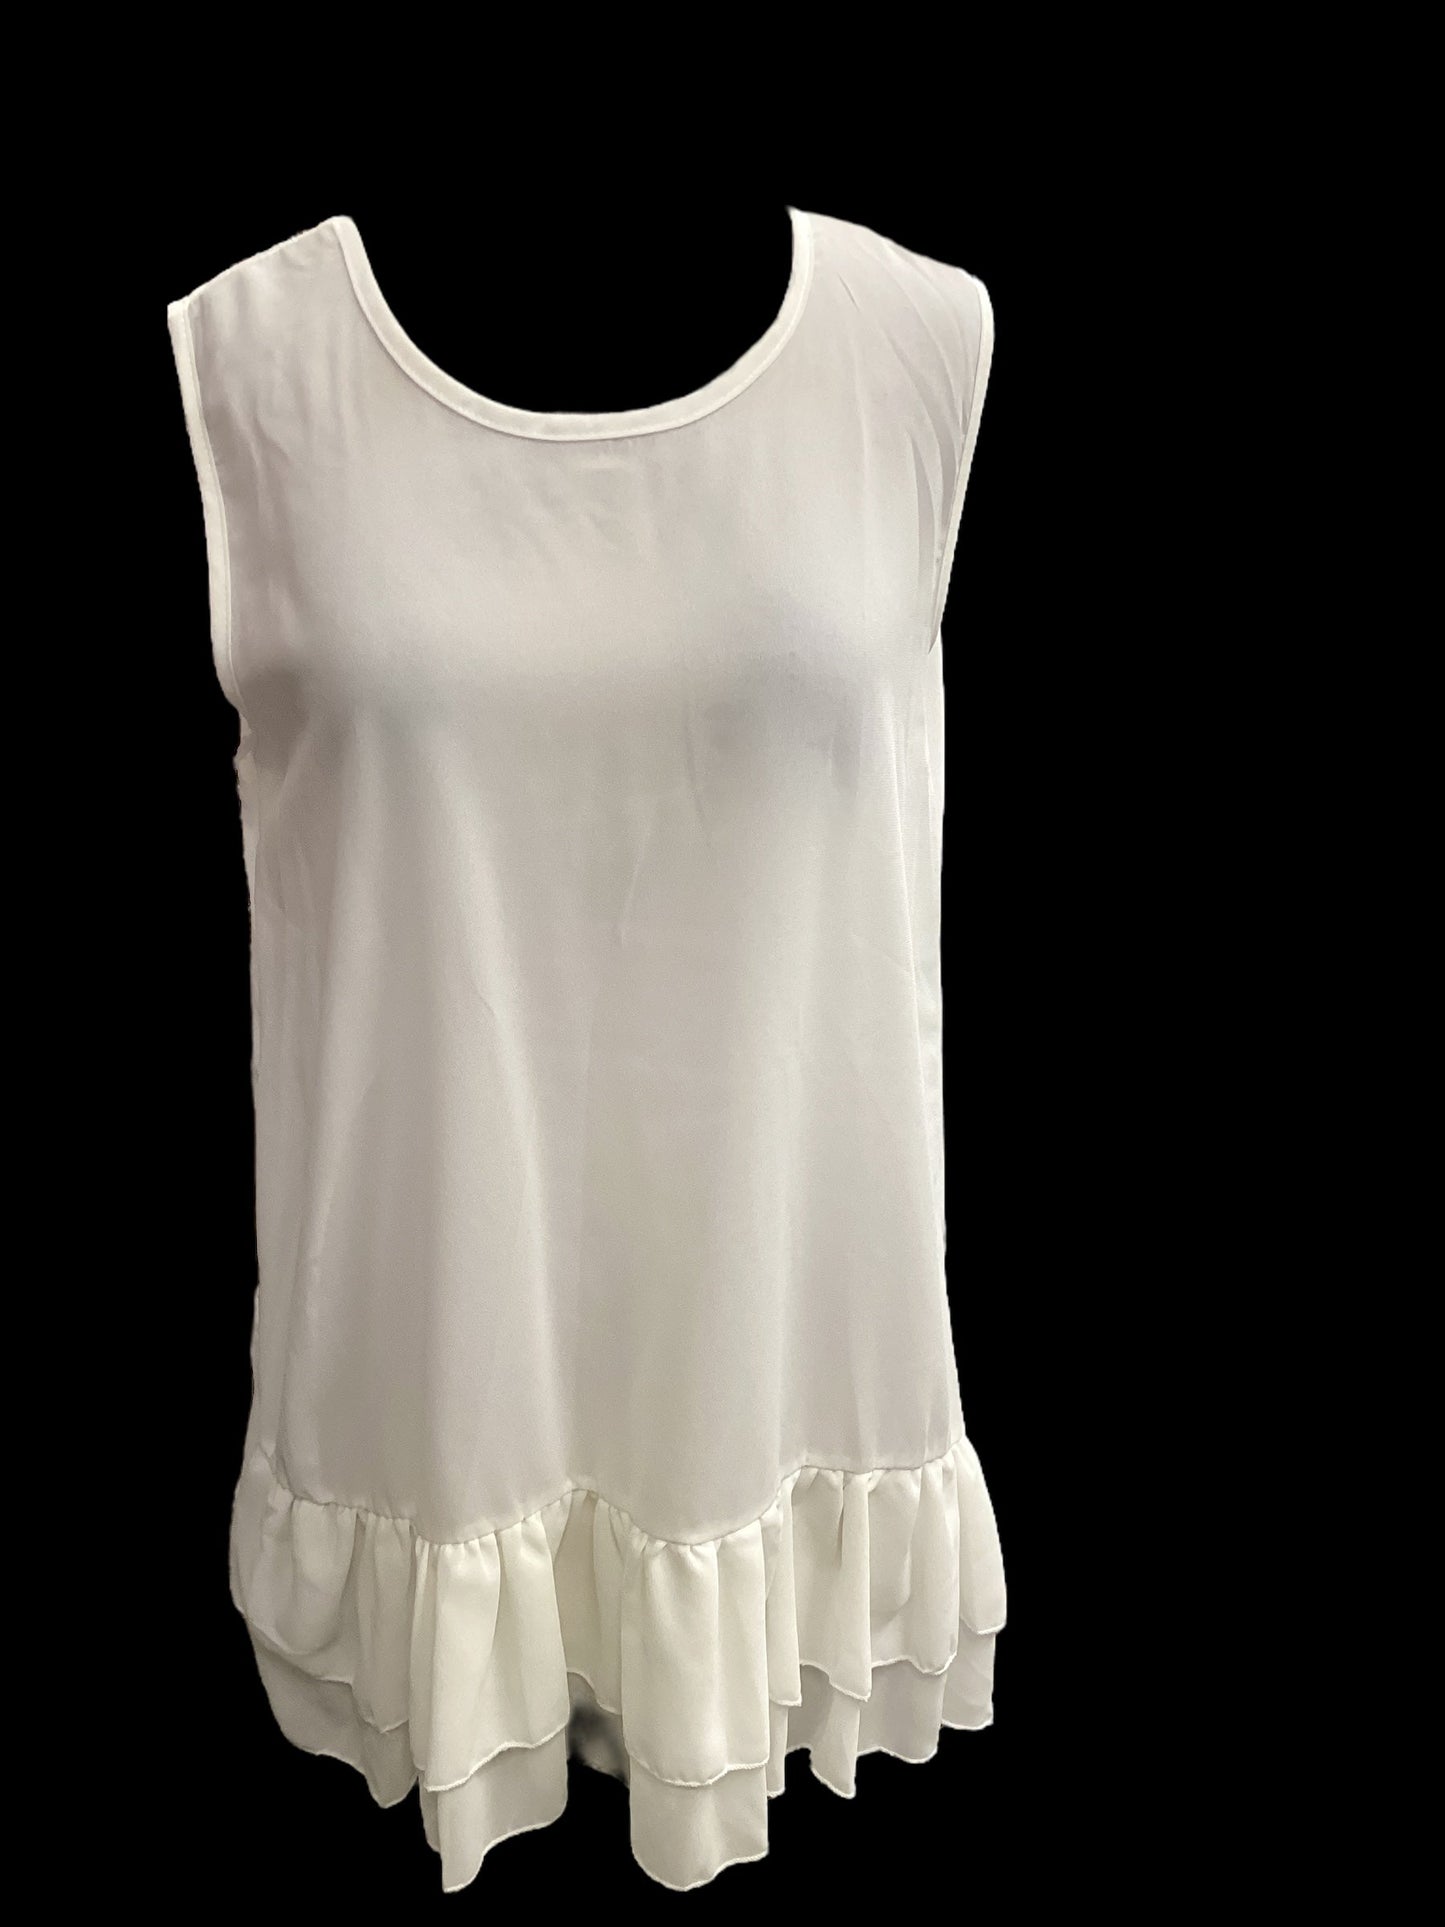 White Top Sleeveless Simply Couture, Size Xl